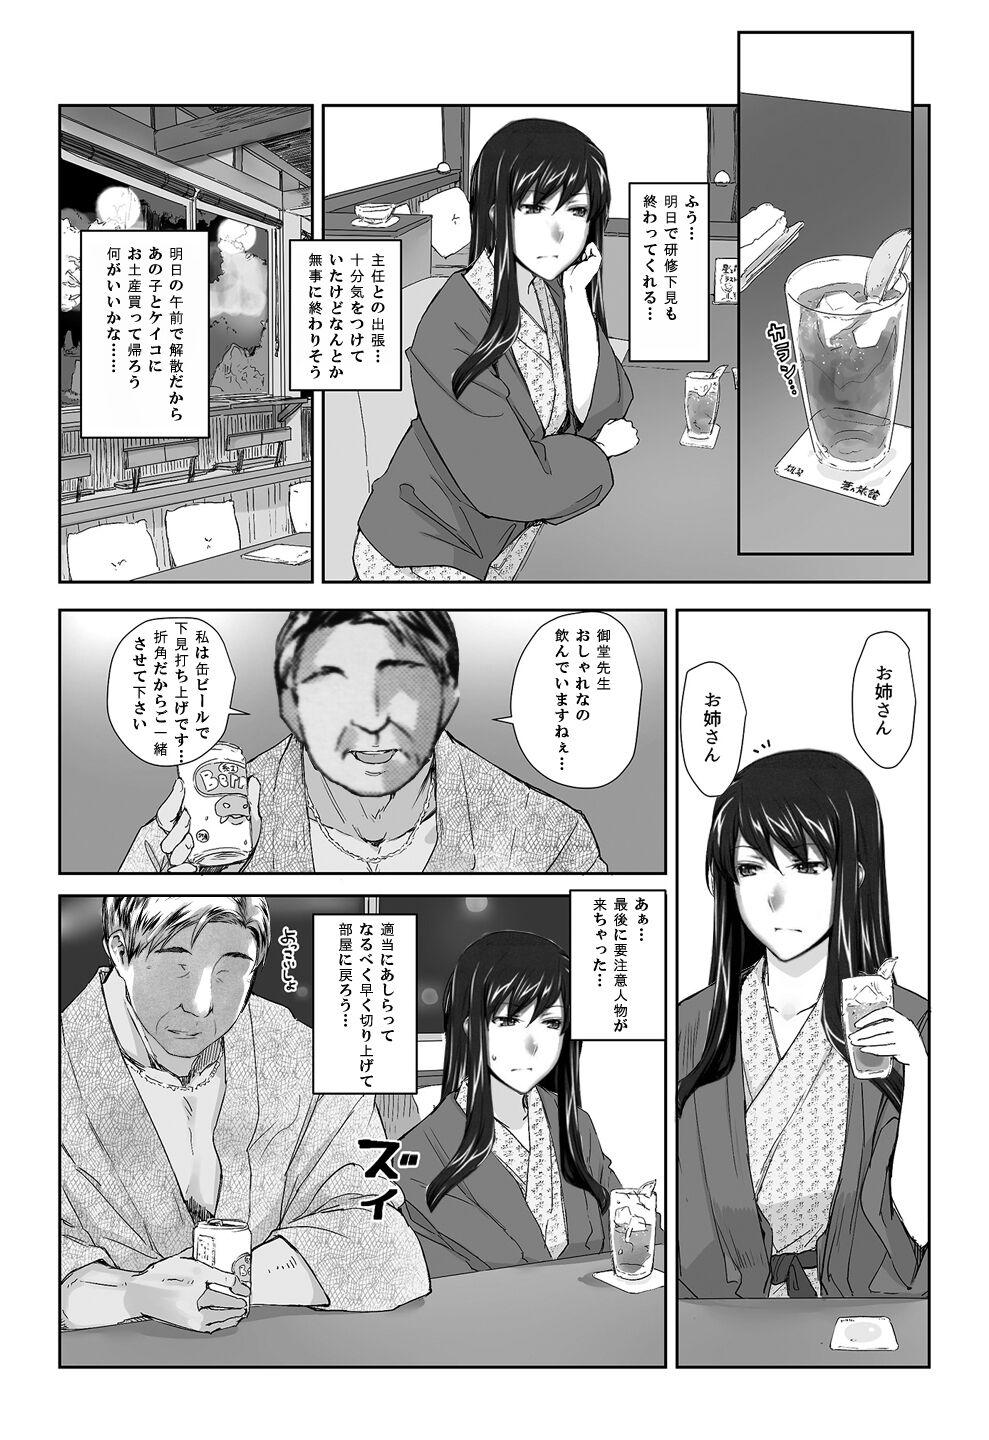 Sucking Cock Sakiko-san in delusion Vol.8 revised ~Sakiko-san's circumstance at an educational training Route3~ (collage) (Continue to “First day of study trip” (page 42) of Vol.1) Pay - Page 3